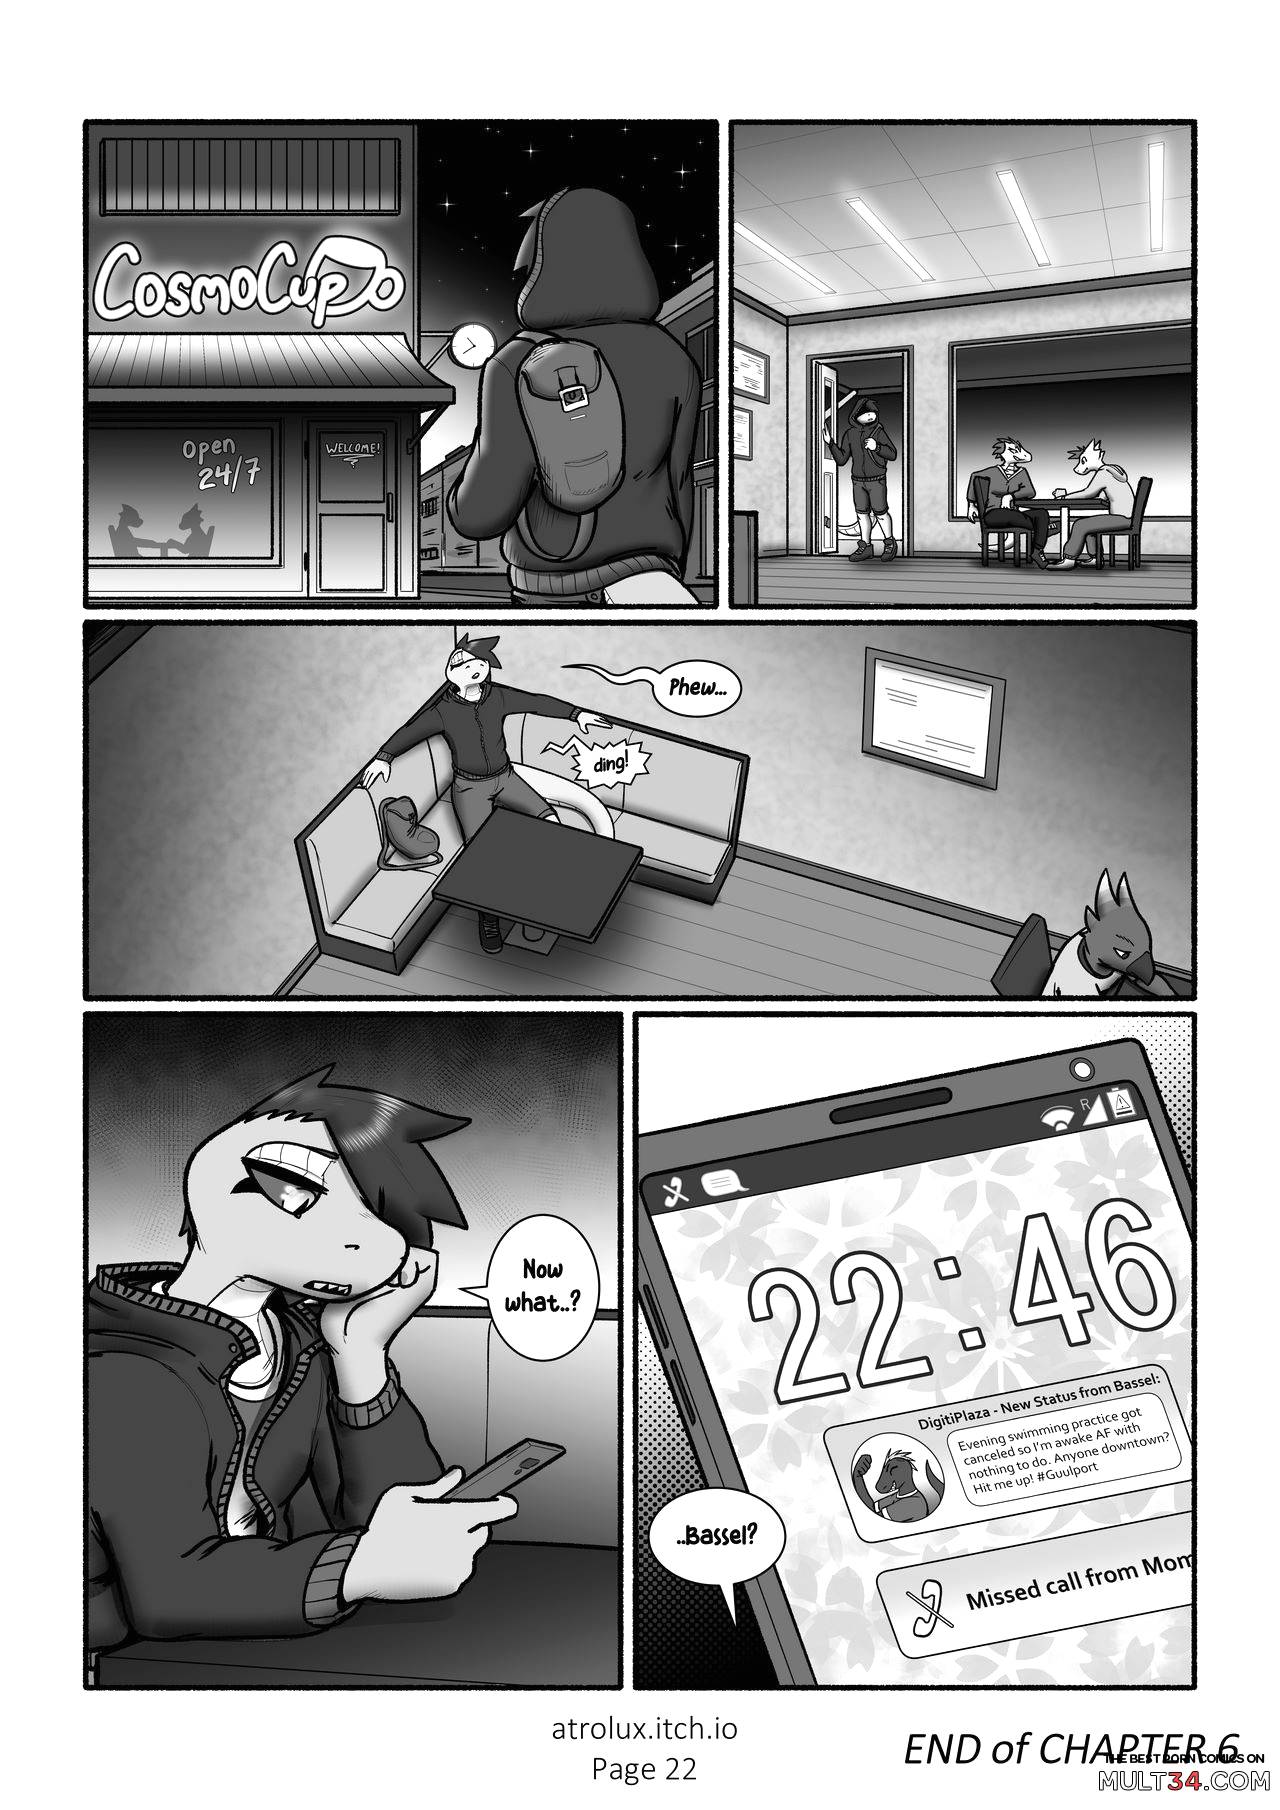 Shedding Inhibitions 6 - Feigned Innocence page 25